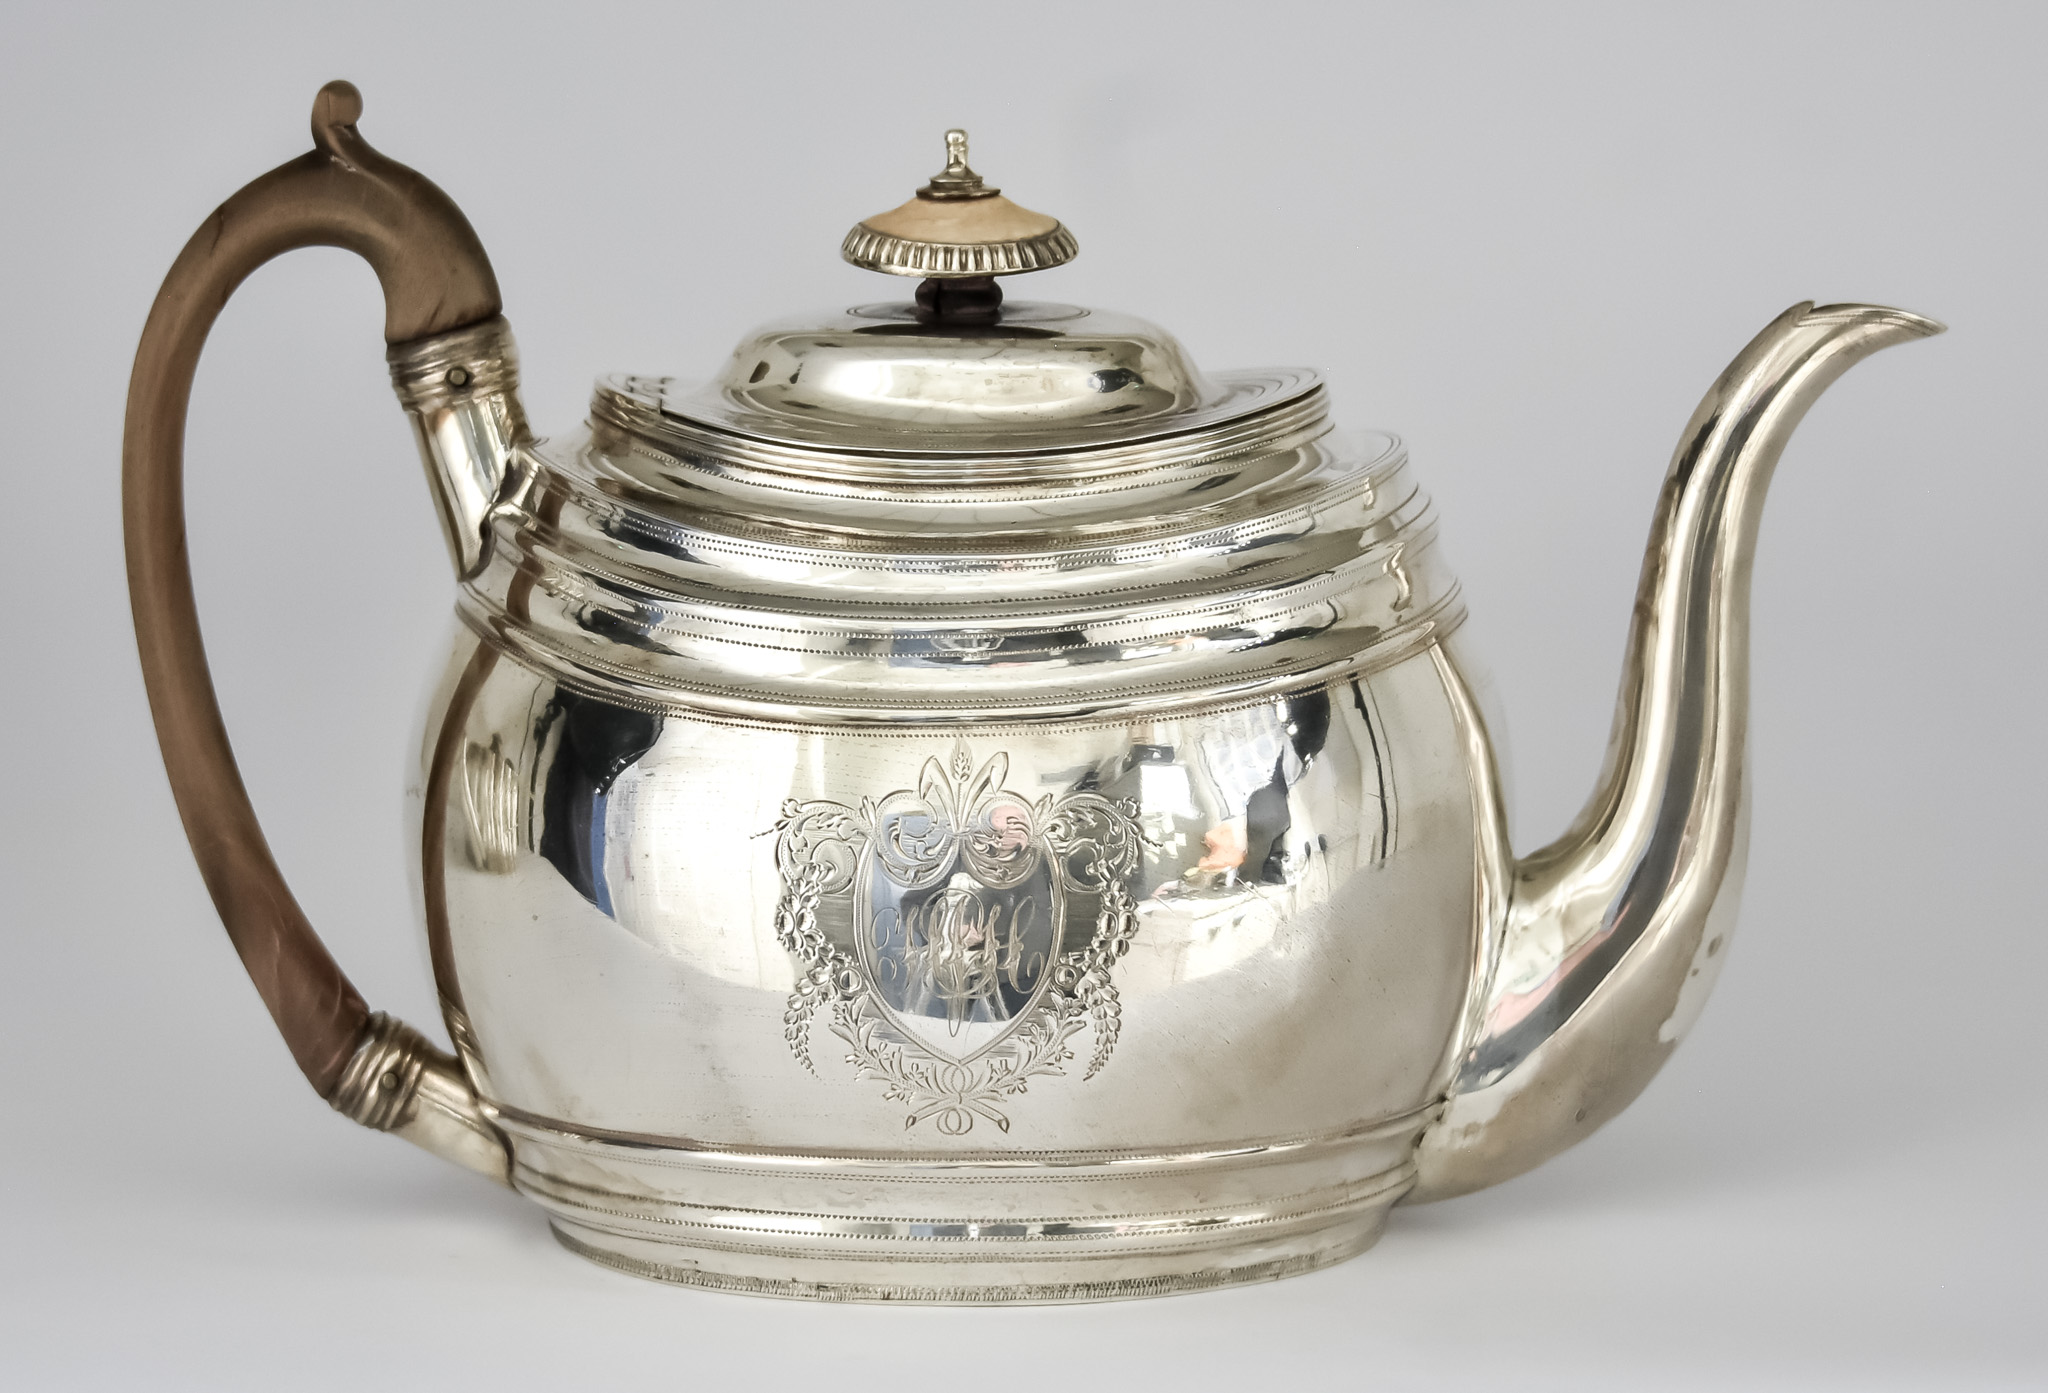 A George III Silver Oval Teapot, by Solomon Hougham, London 1802, with domed cover, stepped rim,